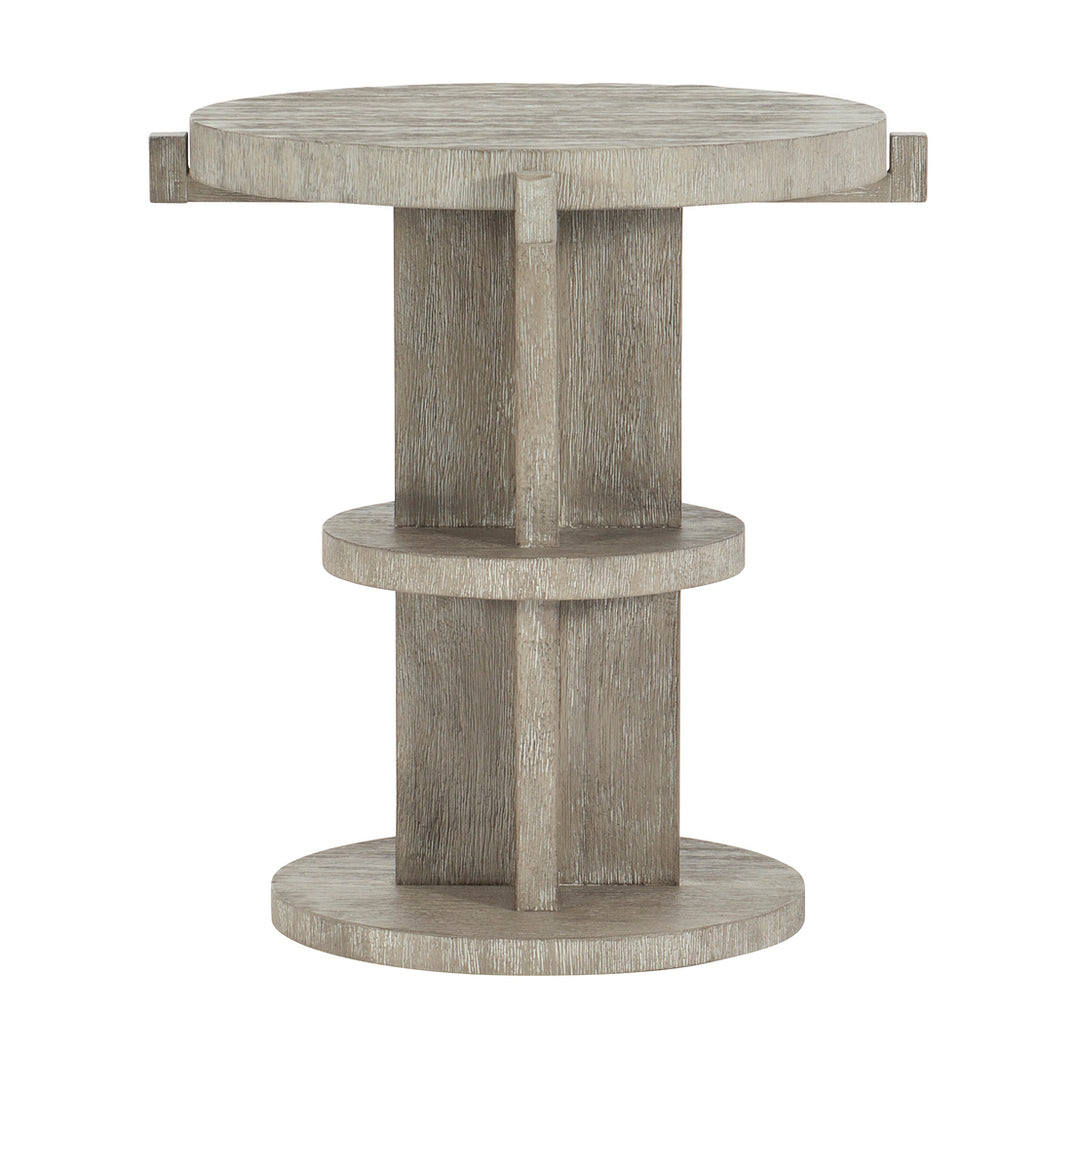 FOUNDATIONS ACCENT TABLE ROUND